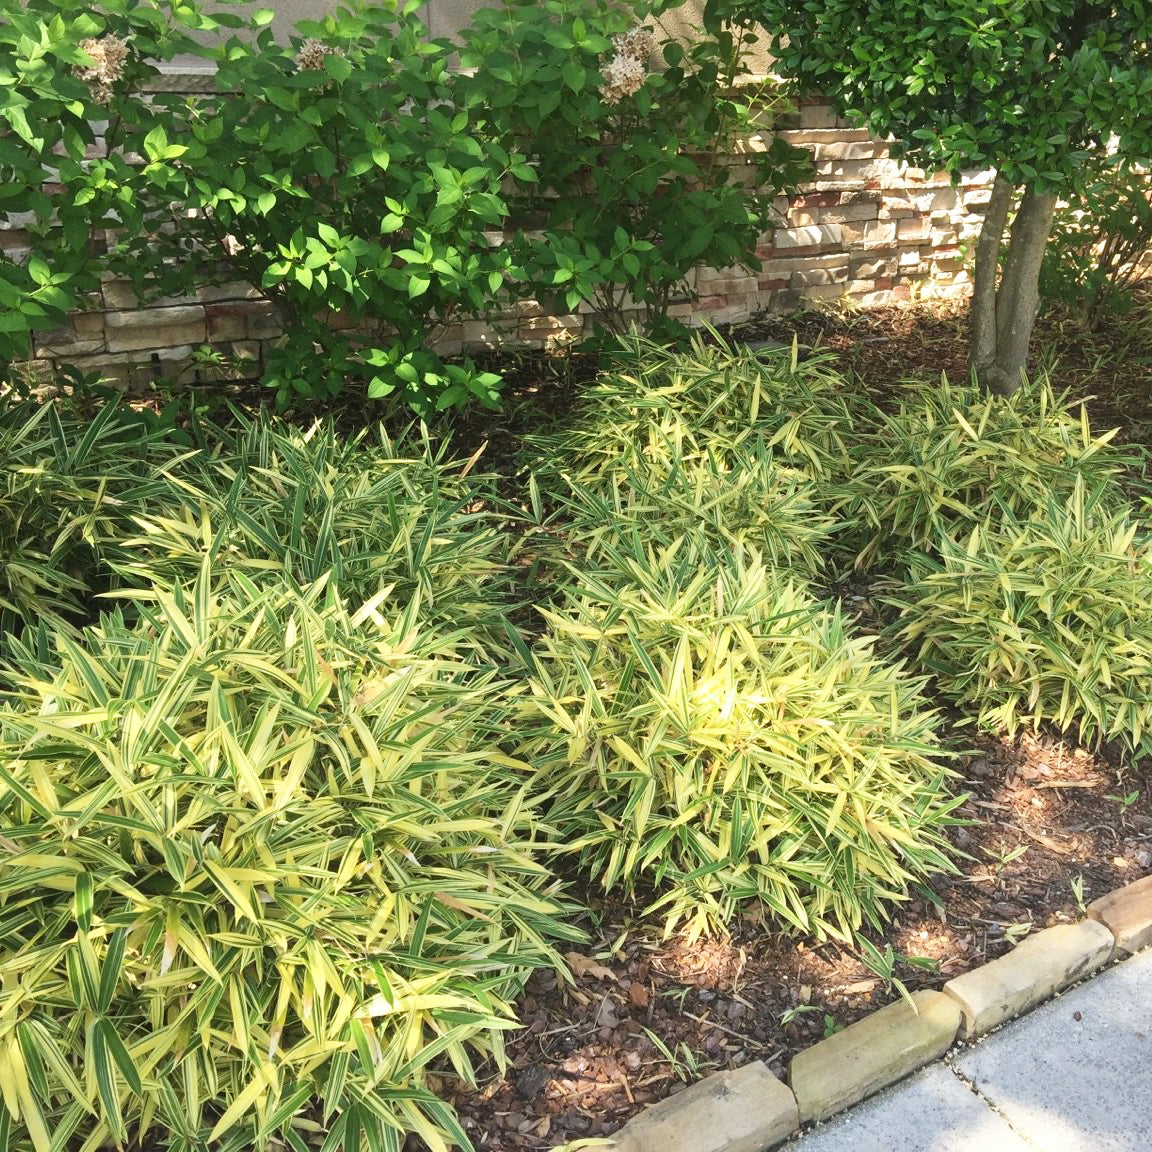 Short statue, shrub-like bamboo. Foliage is a vibrant green with light yellow variegation. Bamboo planted next to sidewalk.